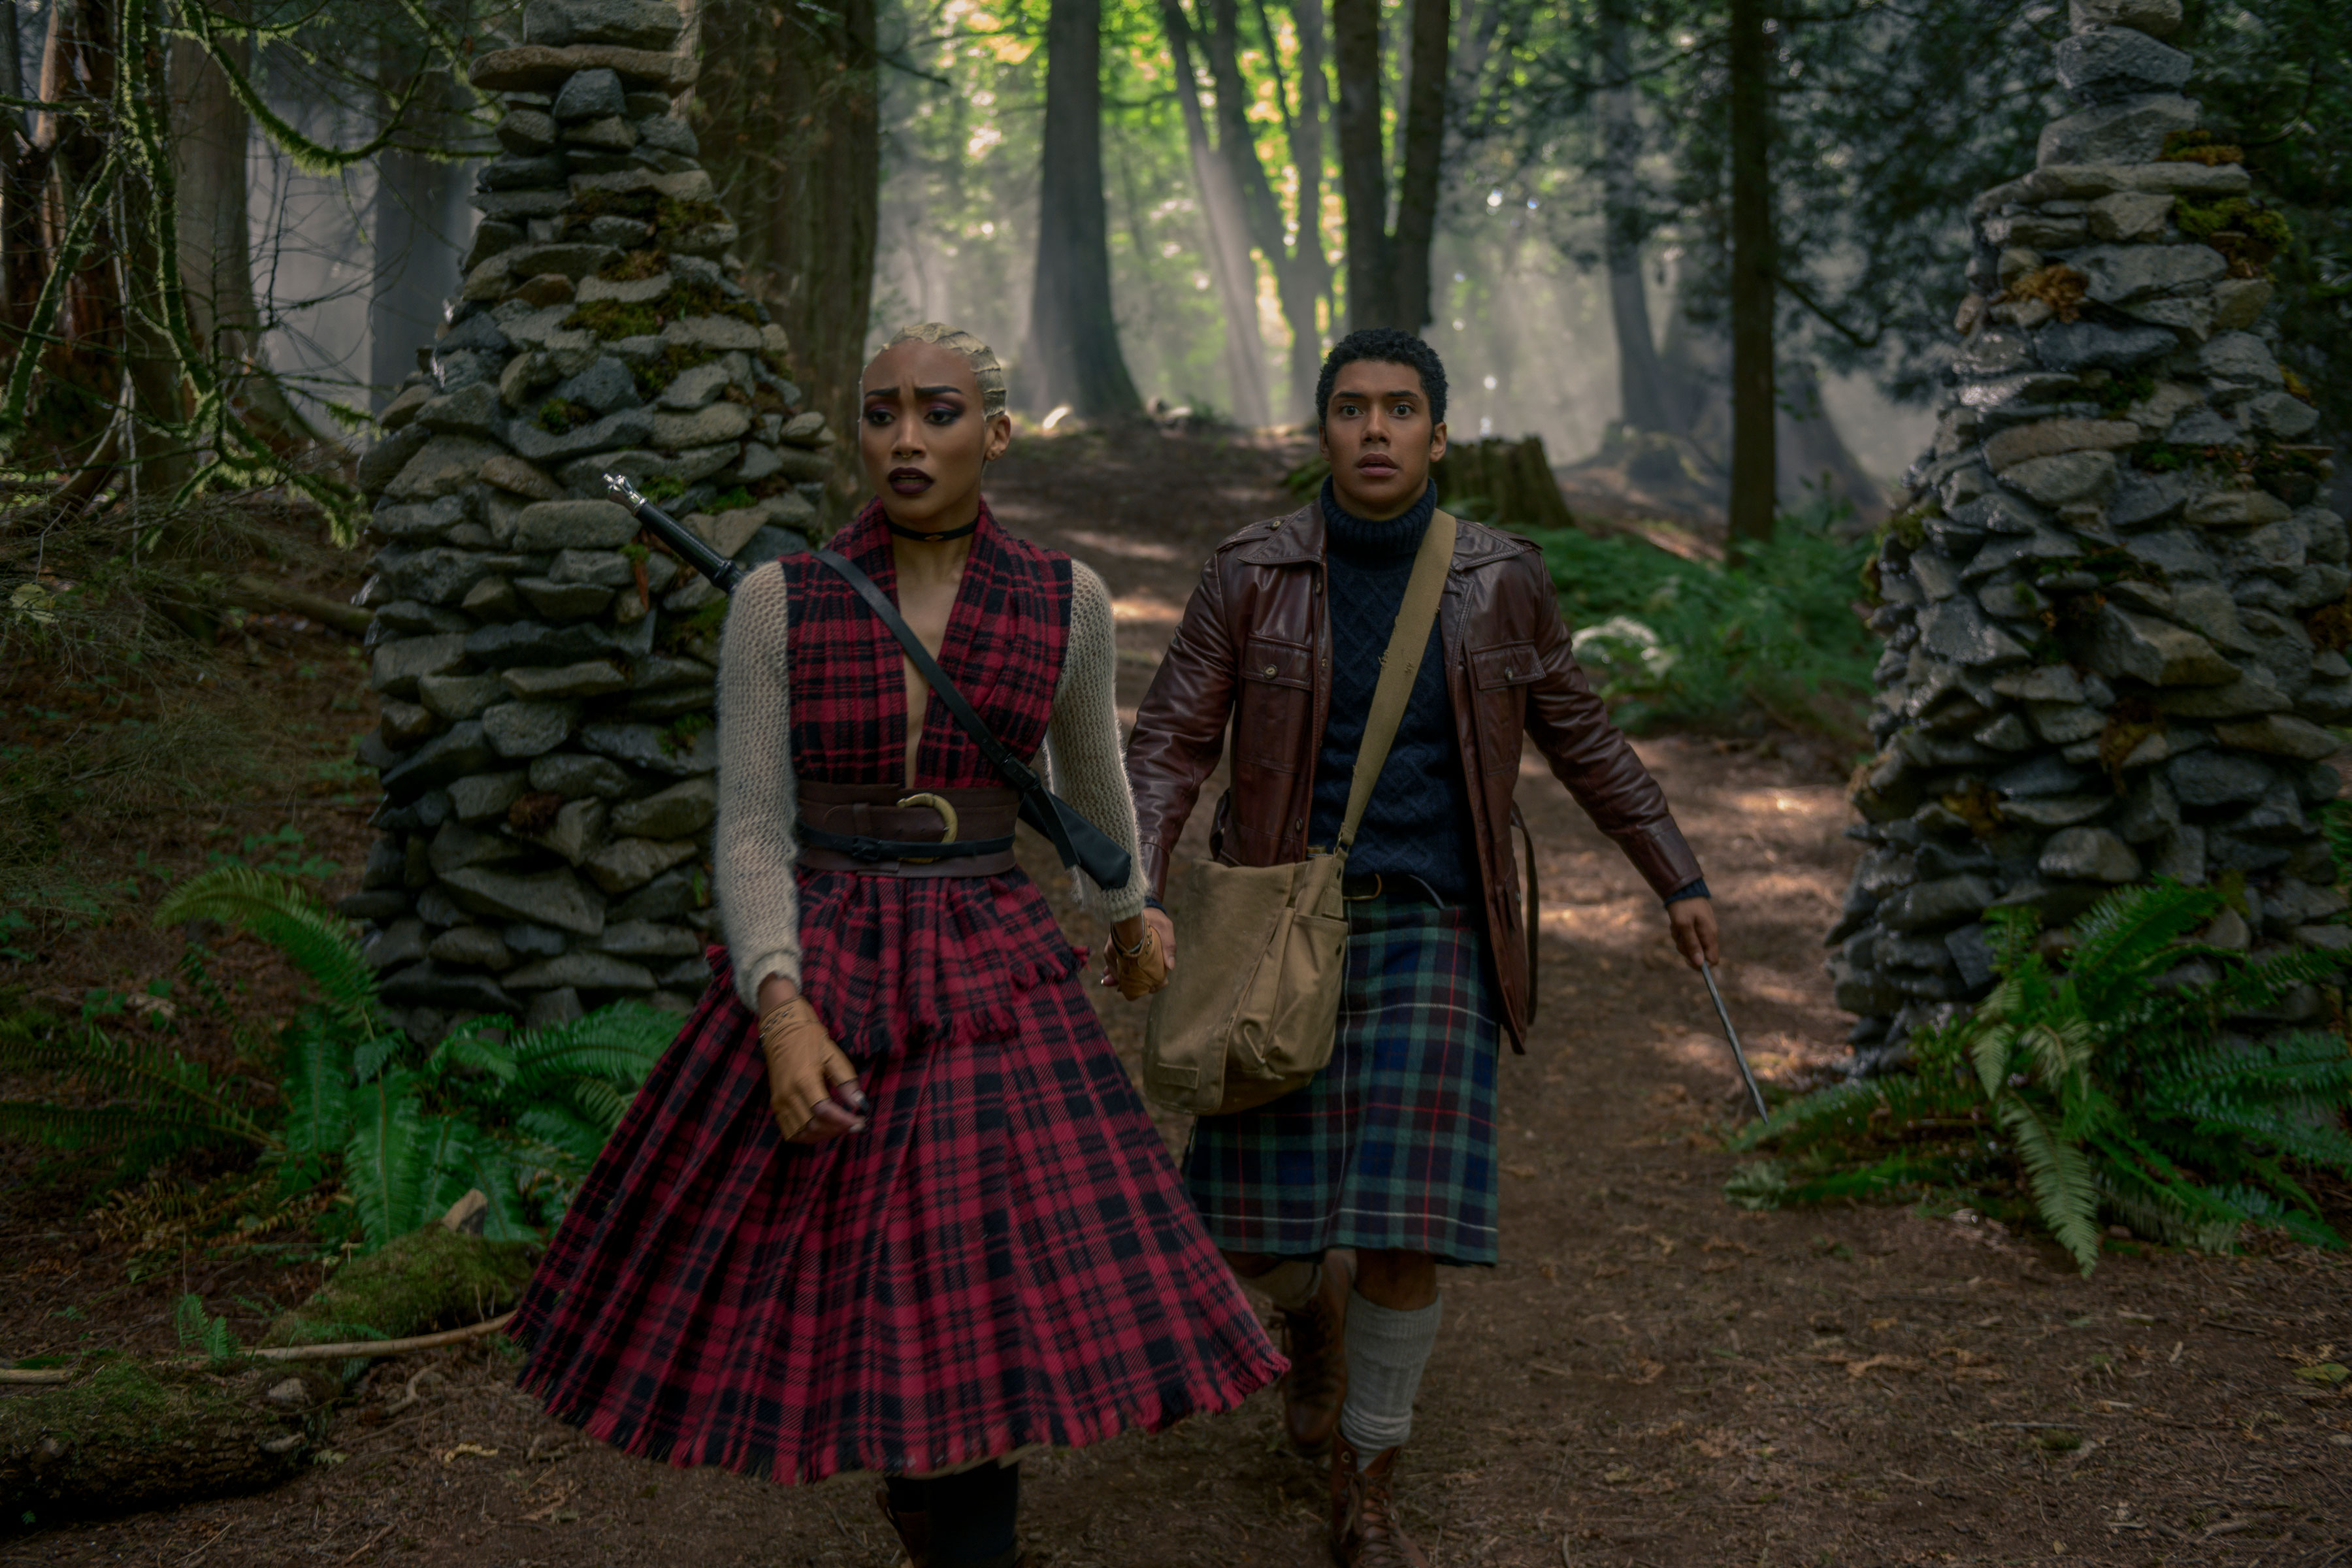 Chance appeared on Chilling Adventures of Sabrina in 2018